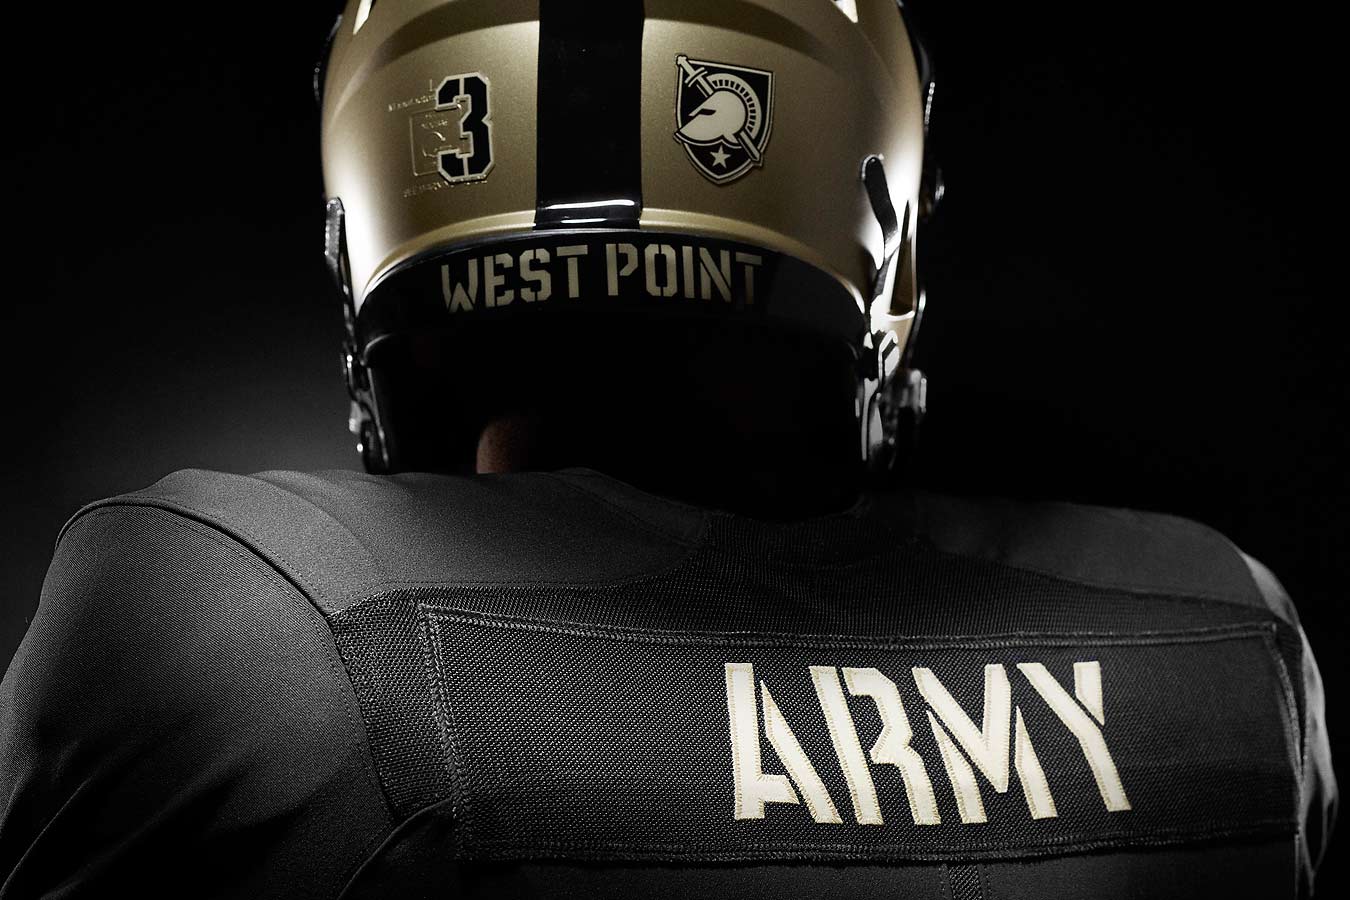 Nike Army Logo - Army unveils new name, uniforms and logo in athletics rebrand